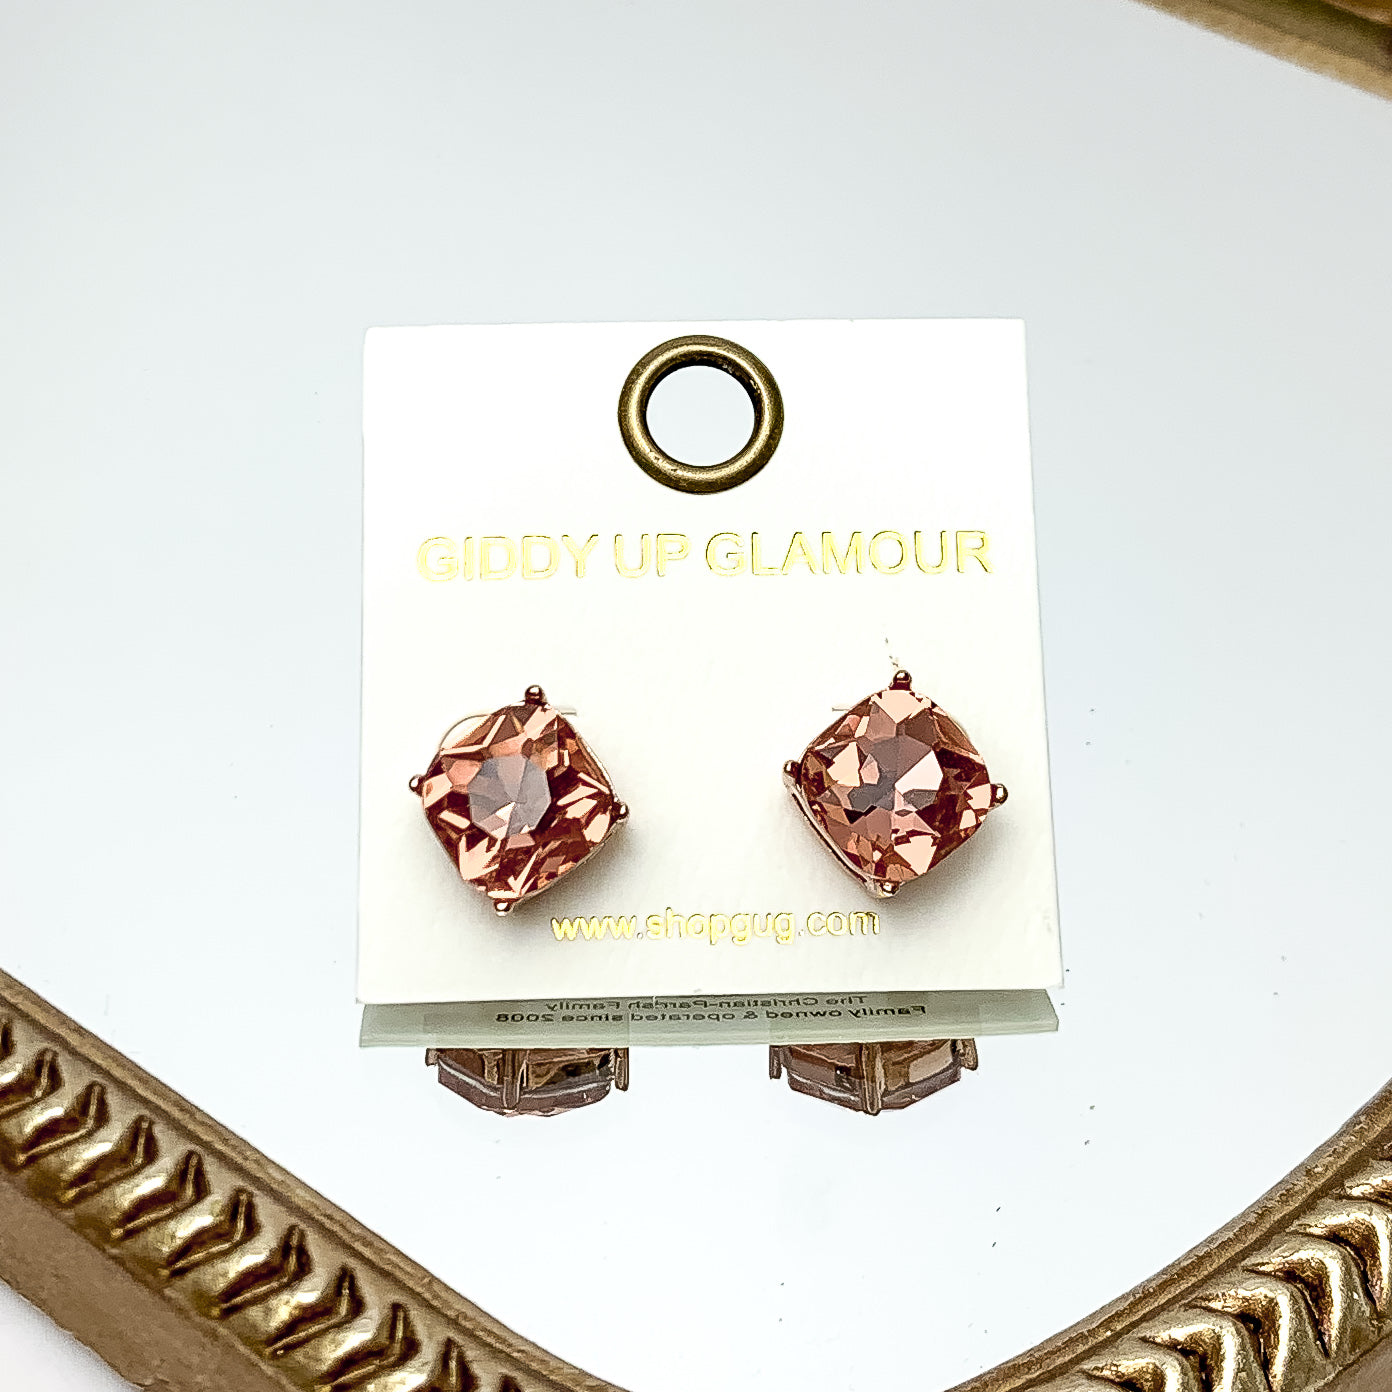 Large Crystal Stud Earrings in Light Pink. These earrings are pictured laying on a gold trimmed mirror.